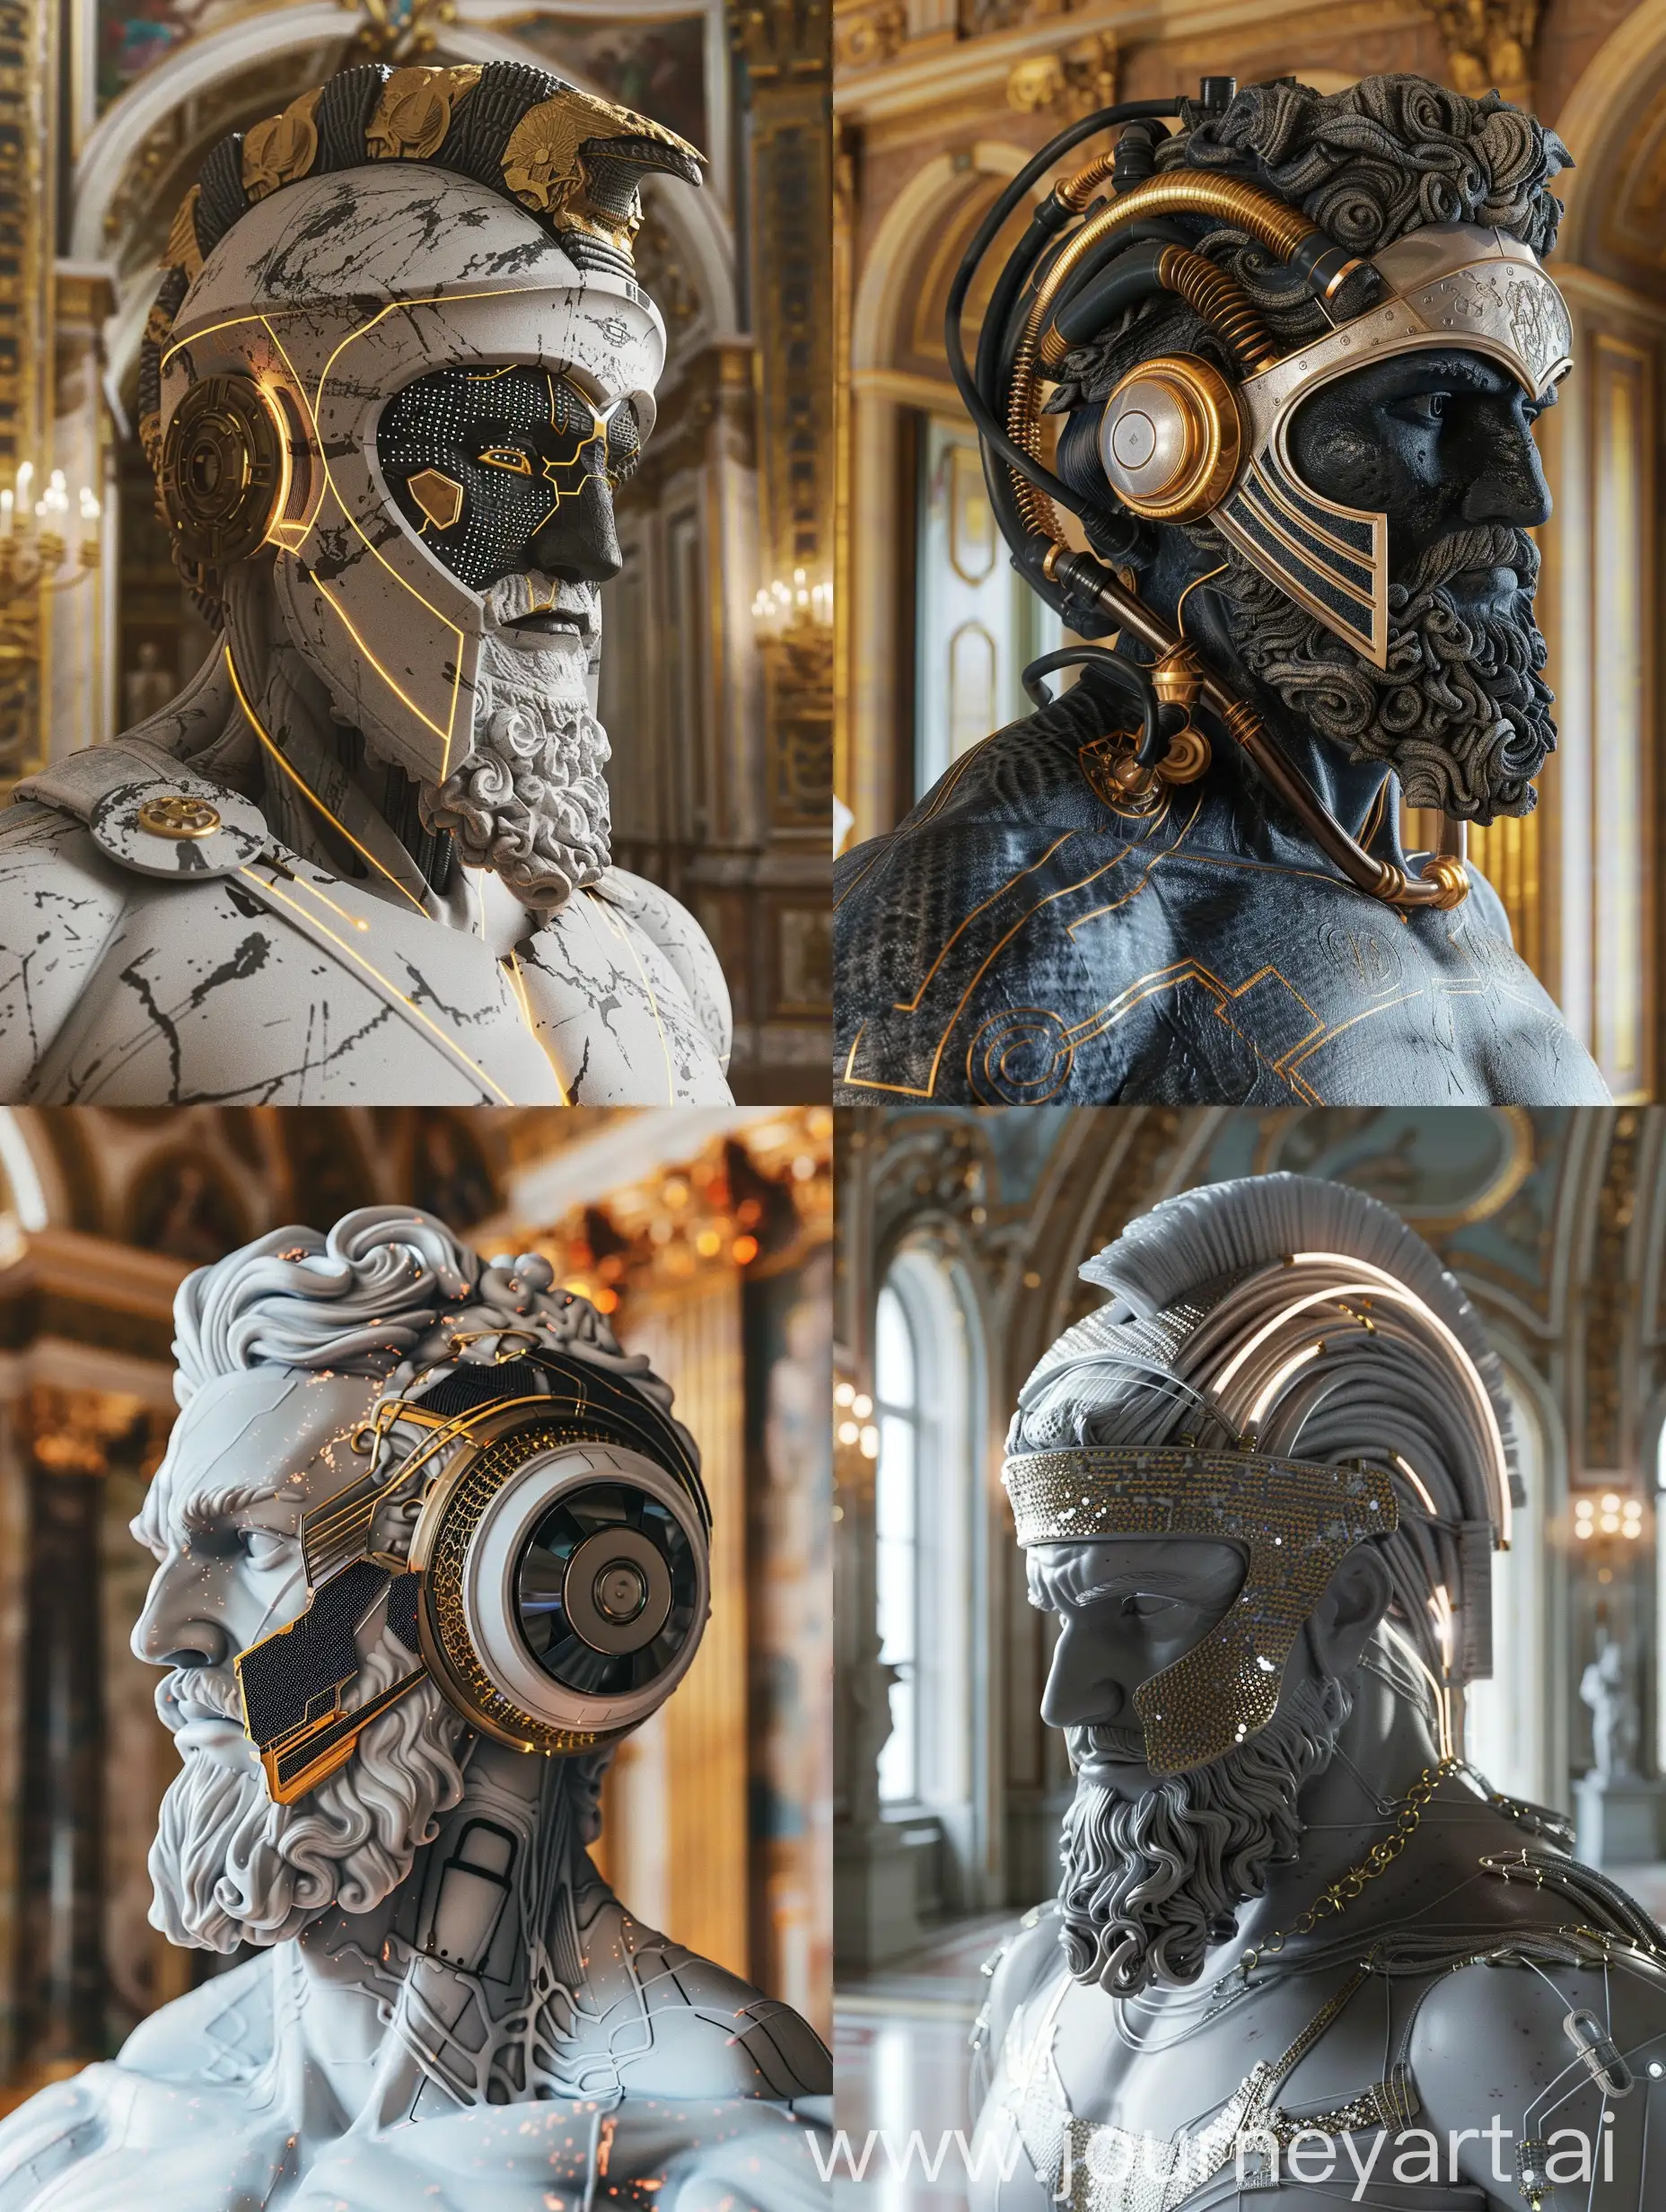 In a French Renaissance-style museum, a hyper-realistic sculpture of Zeus takes center stage. Against the backdrop of opulent surroundings, the sculpture portrays Zeus with intricate details, blending ancient Greek aesthetics with futuristic elements.

The sculpture's cybernetic helmet seamlessly integrates with Zeus's divine features, featuring carbon fiber textures with golden filigree accents. Sleek metallic accents add depth to the design, while pulsating energy conduits enhance the sculpture's dynamic presence.

As visitors approach, they are greeted by the mesmerizing sight of Zeus, exuding an aura of power and majesty. The fusion of ancient mythology and modern technology is palpable, symbolizing the timeless allure of Greek mythology in a contemporary setting.